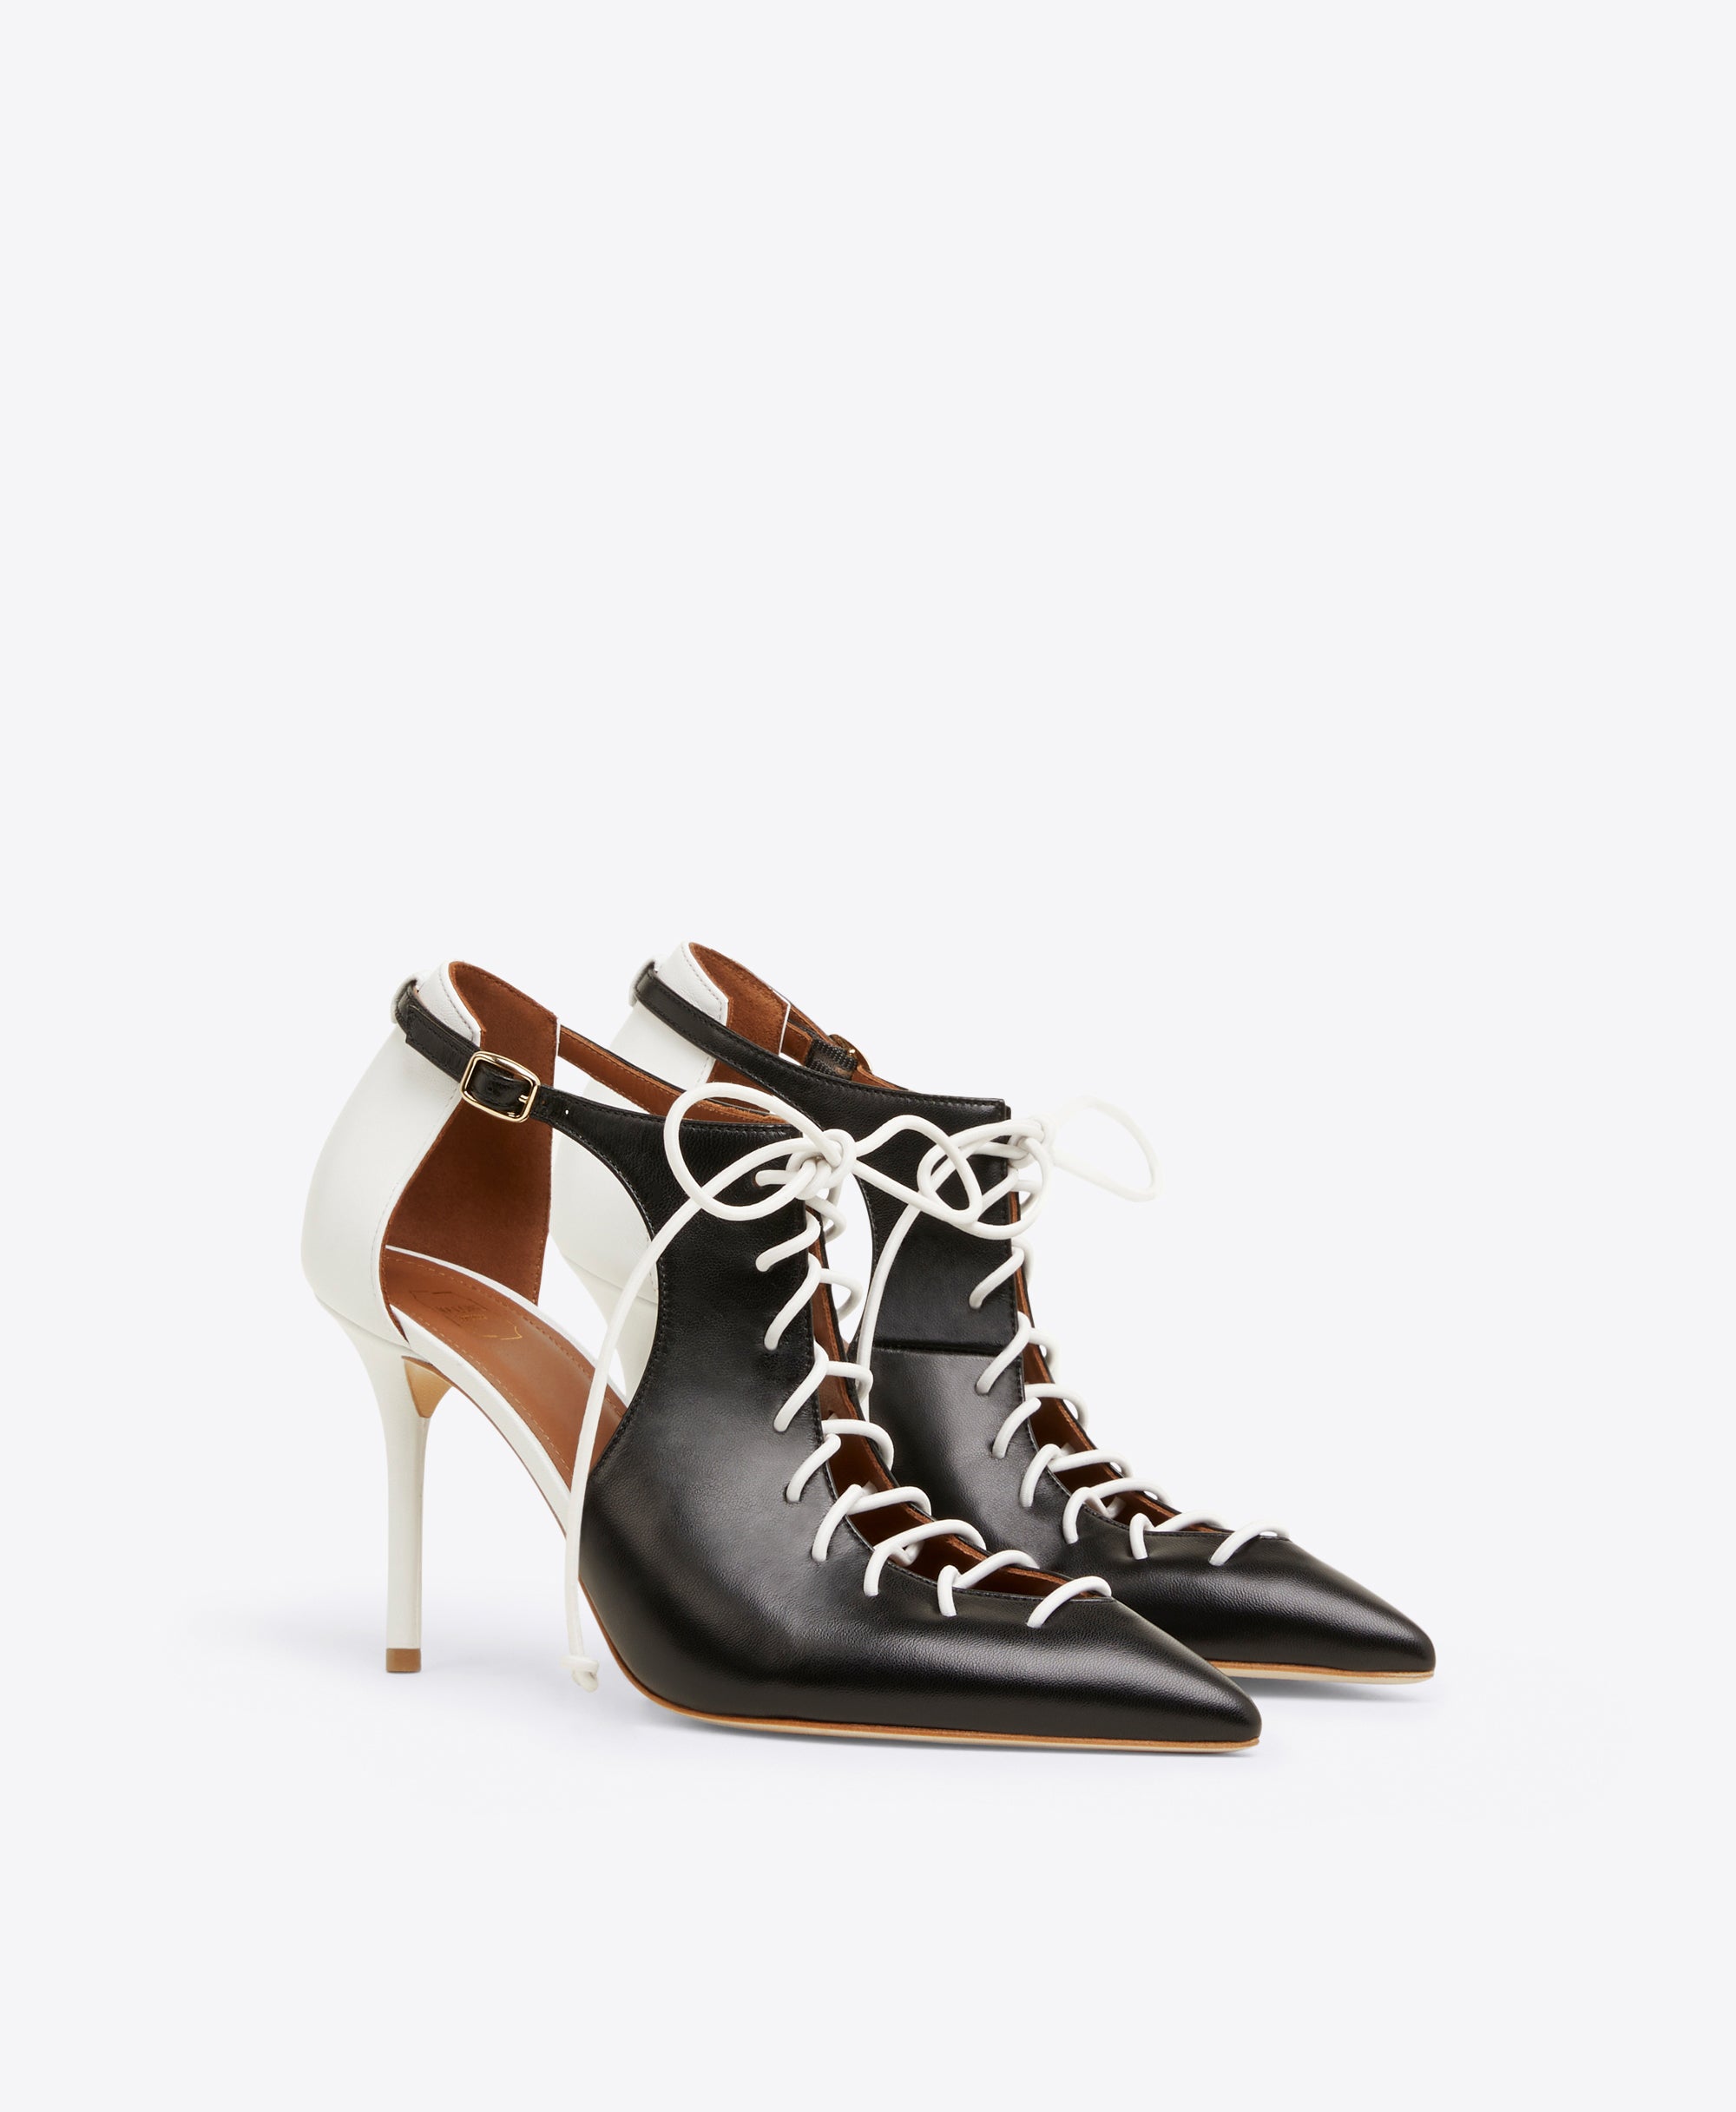 Women's Black Leather Lace-Up Heels Malone Souliers